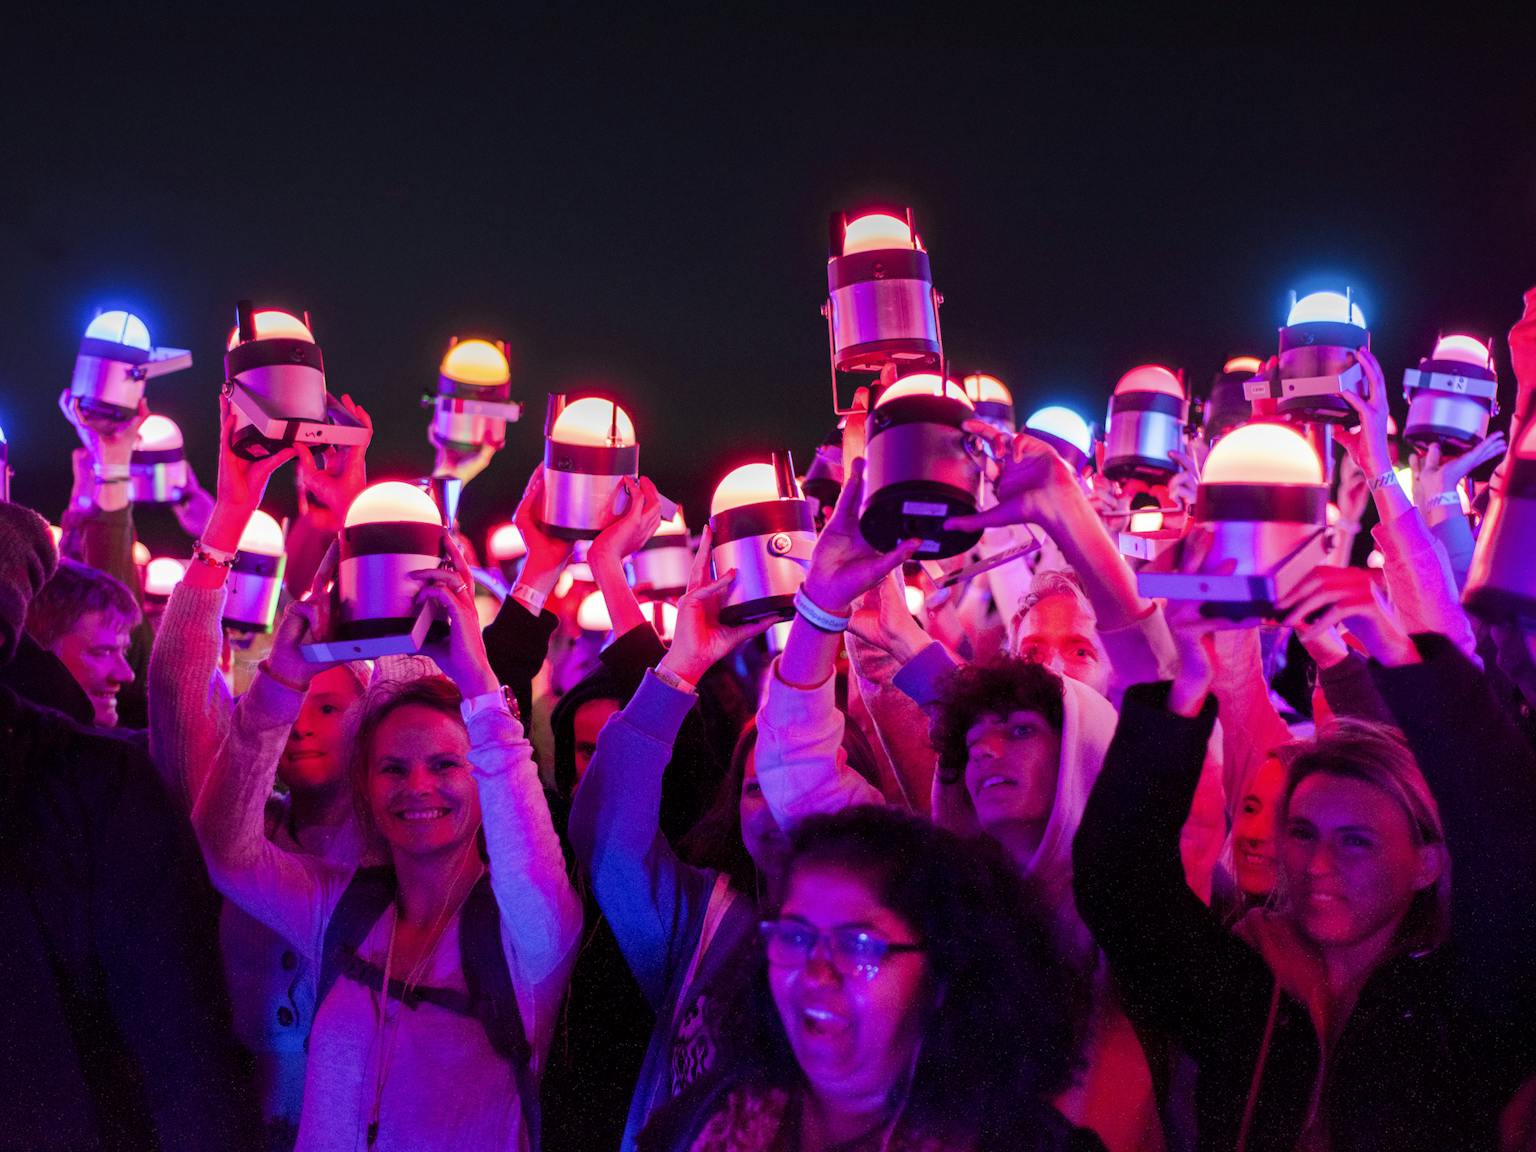 A group of people all holding pink-toned lights above their heads